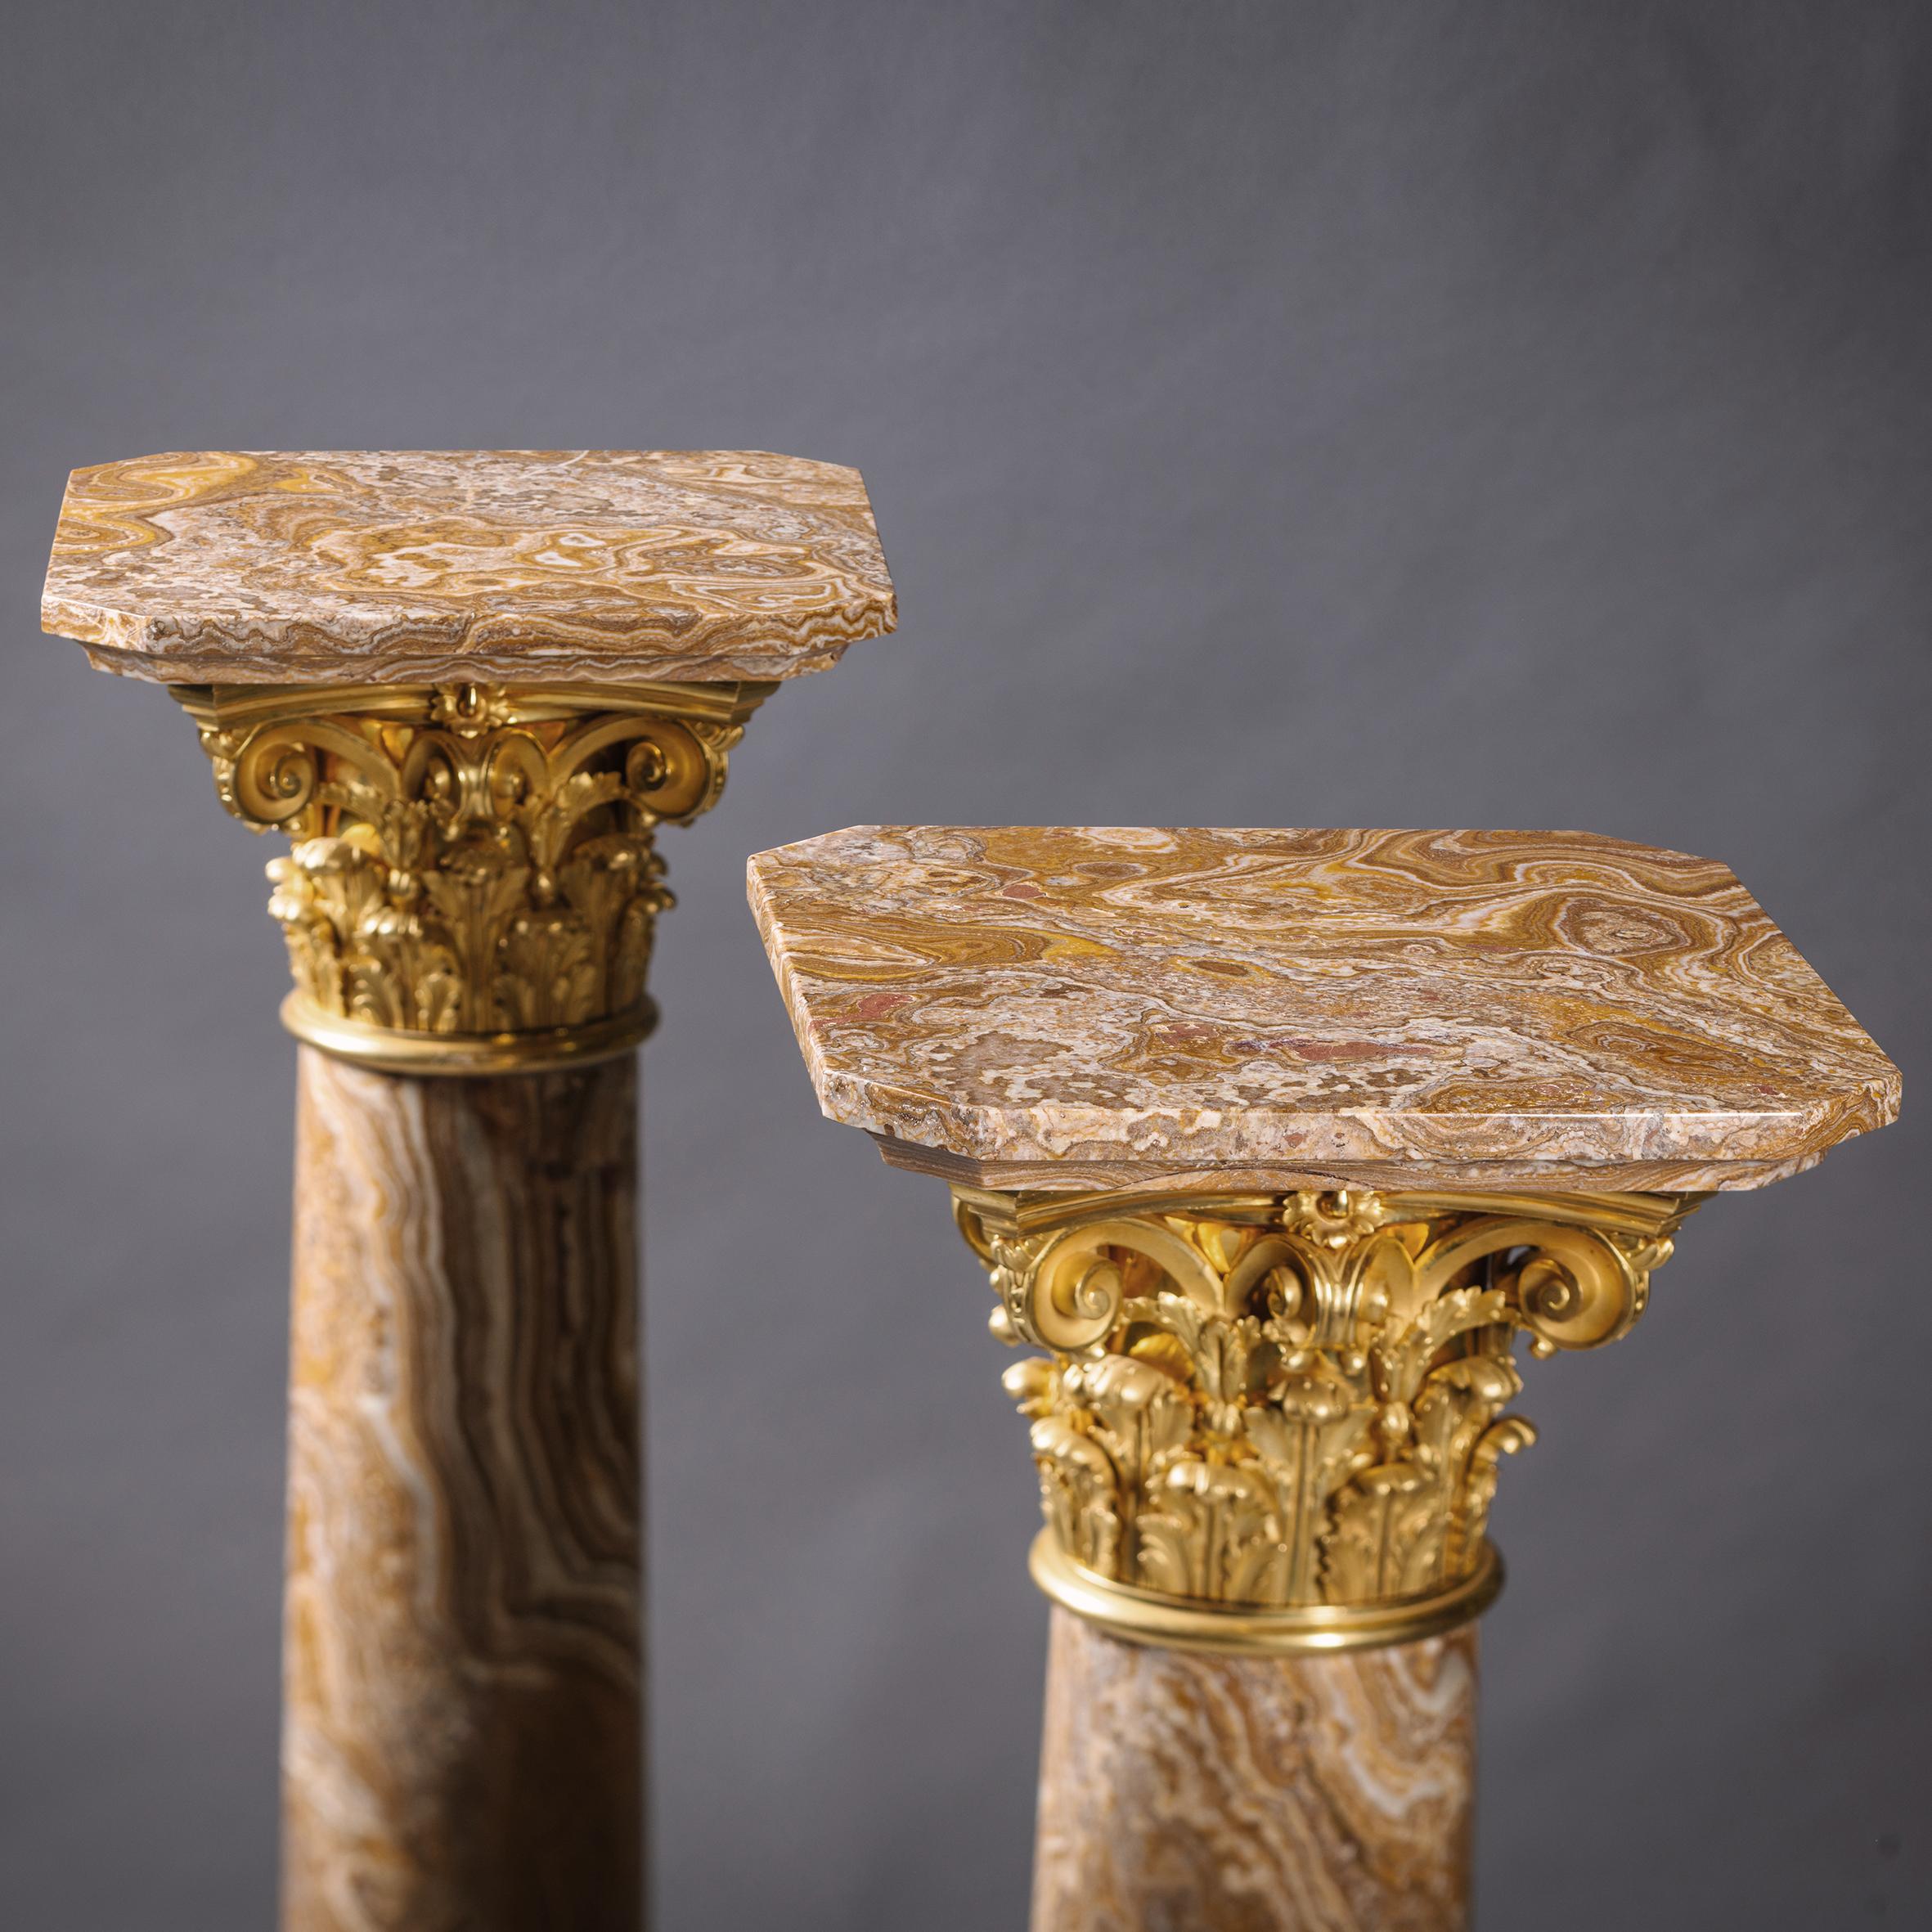 Pair of Louis XVI Style Gilt-Bronze Mounted Pedestals For Sale 2